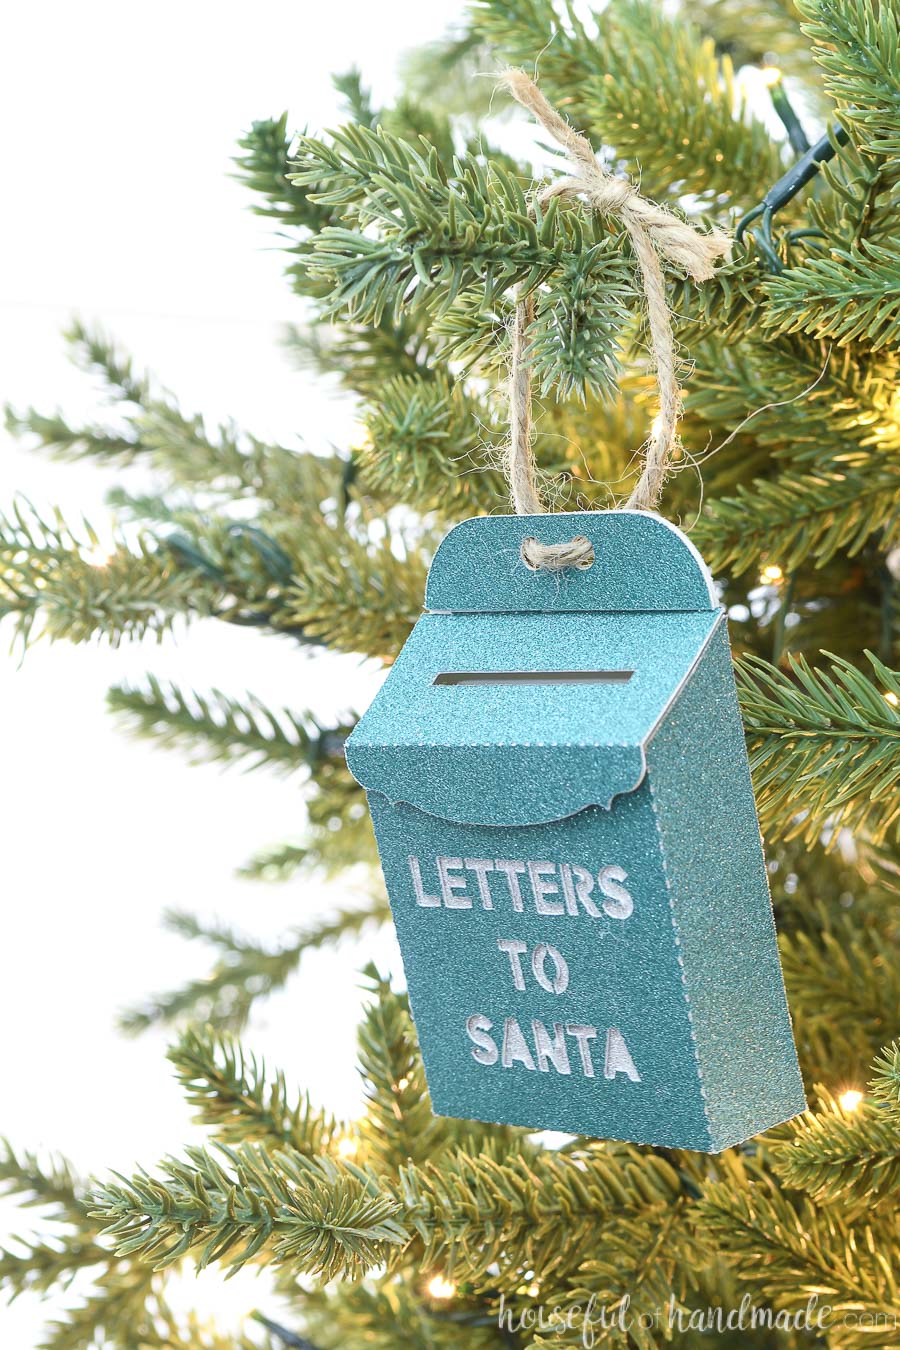 Angled view of the turquoise santa mailbox Christmas ornament hanging on a tree.